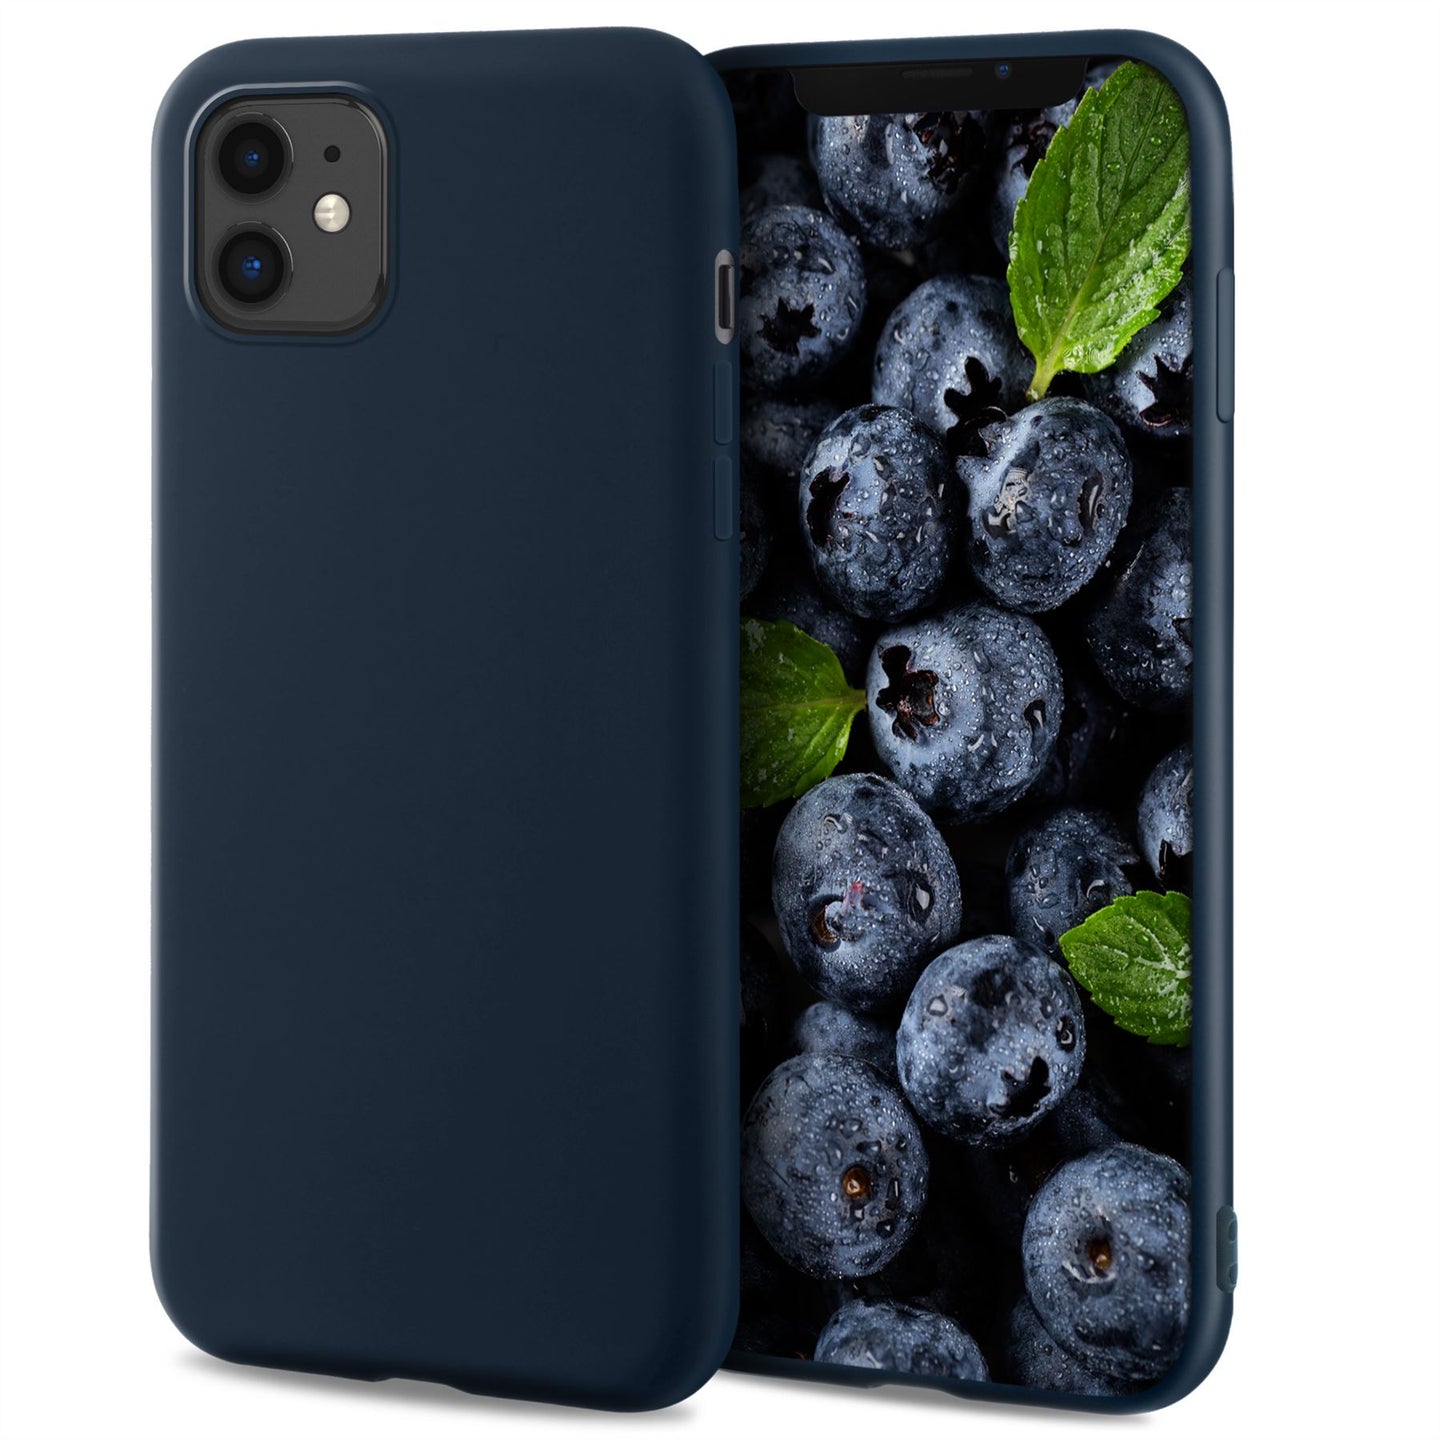 Moozy Lifestyle. Designed for iPhone 11 Case, Midnight Blue - Liquid Silicone Cover with Matte Finish and Soft Microfiber Lining